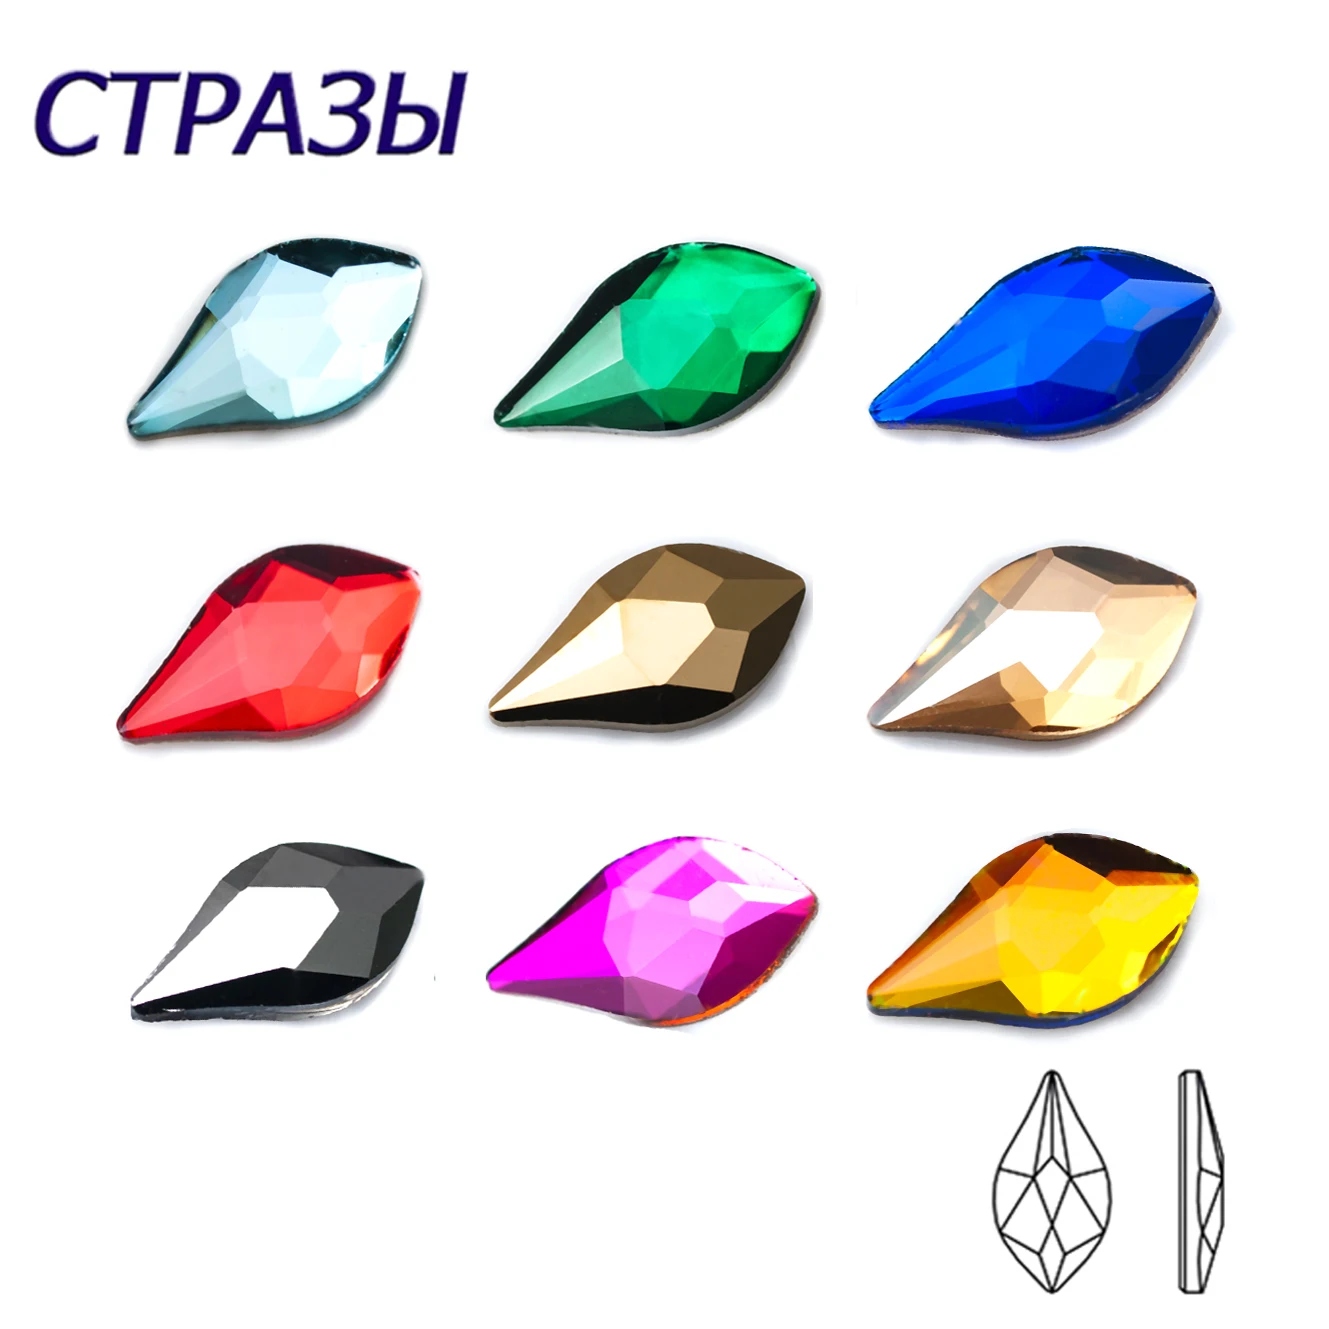 

4x8mm 20pcs Flame Nail Charms Rhinestones Flat Back Nails Art Strass Stones Multi-colors 3D Crystal for Nail Decoration